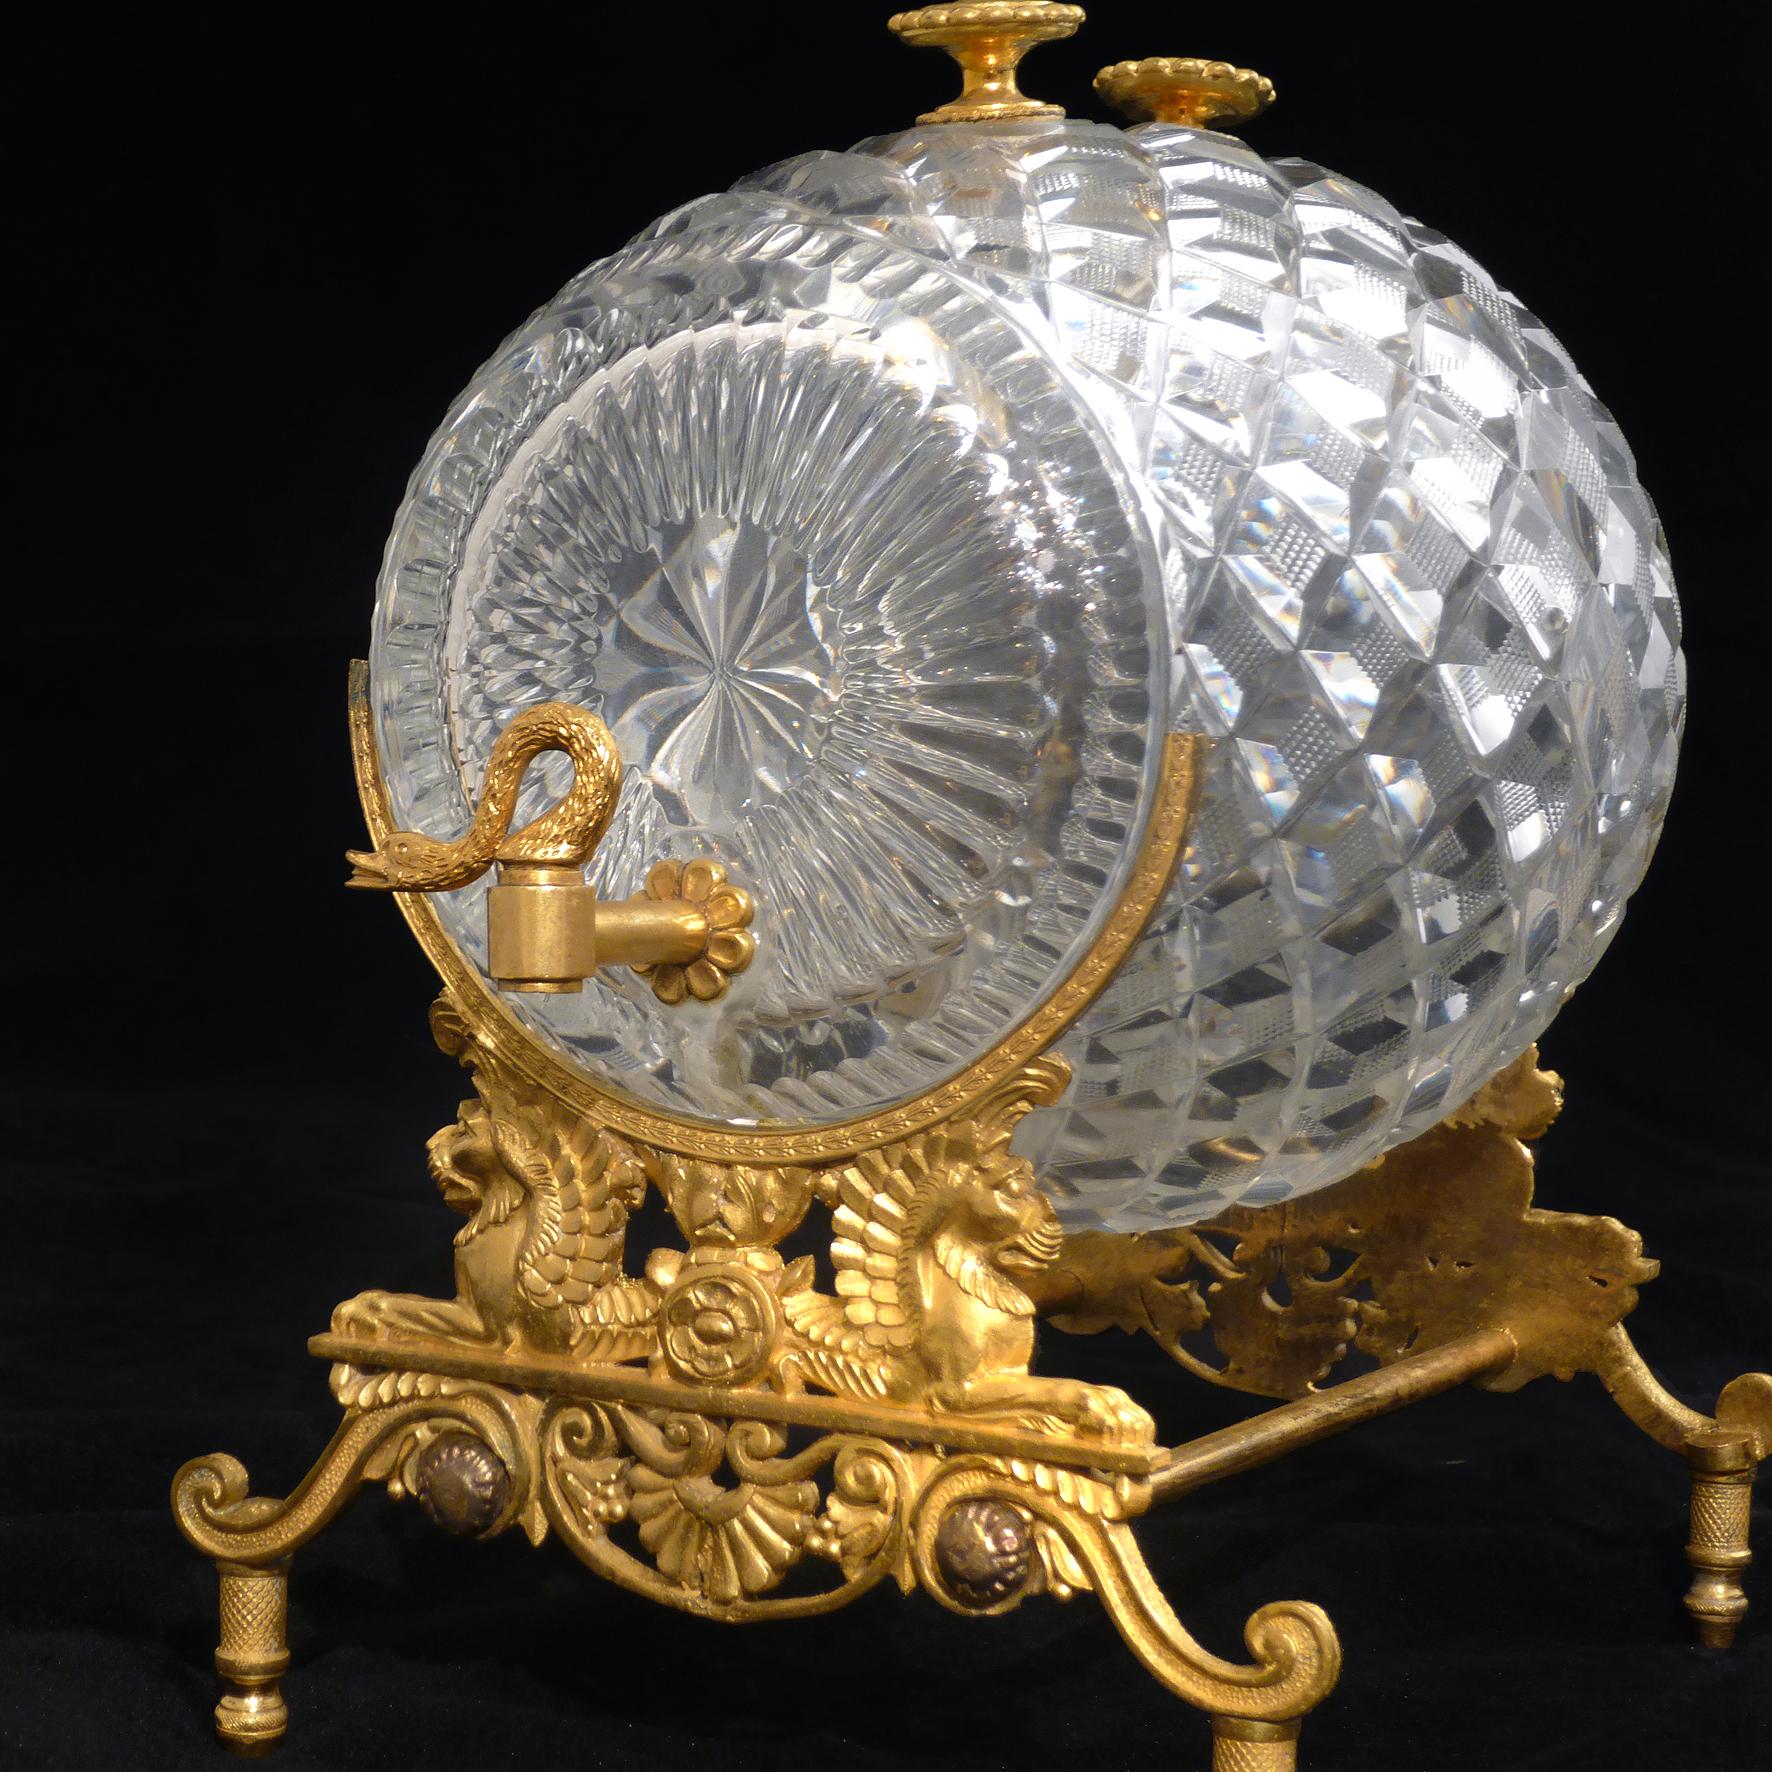 French Charles X Crystal and Gilt-Bronze Spirit or Perfume Dispenser For Sale